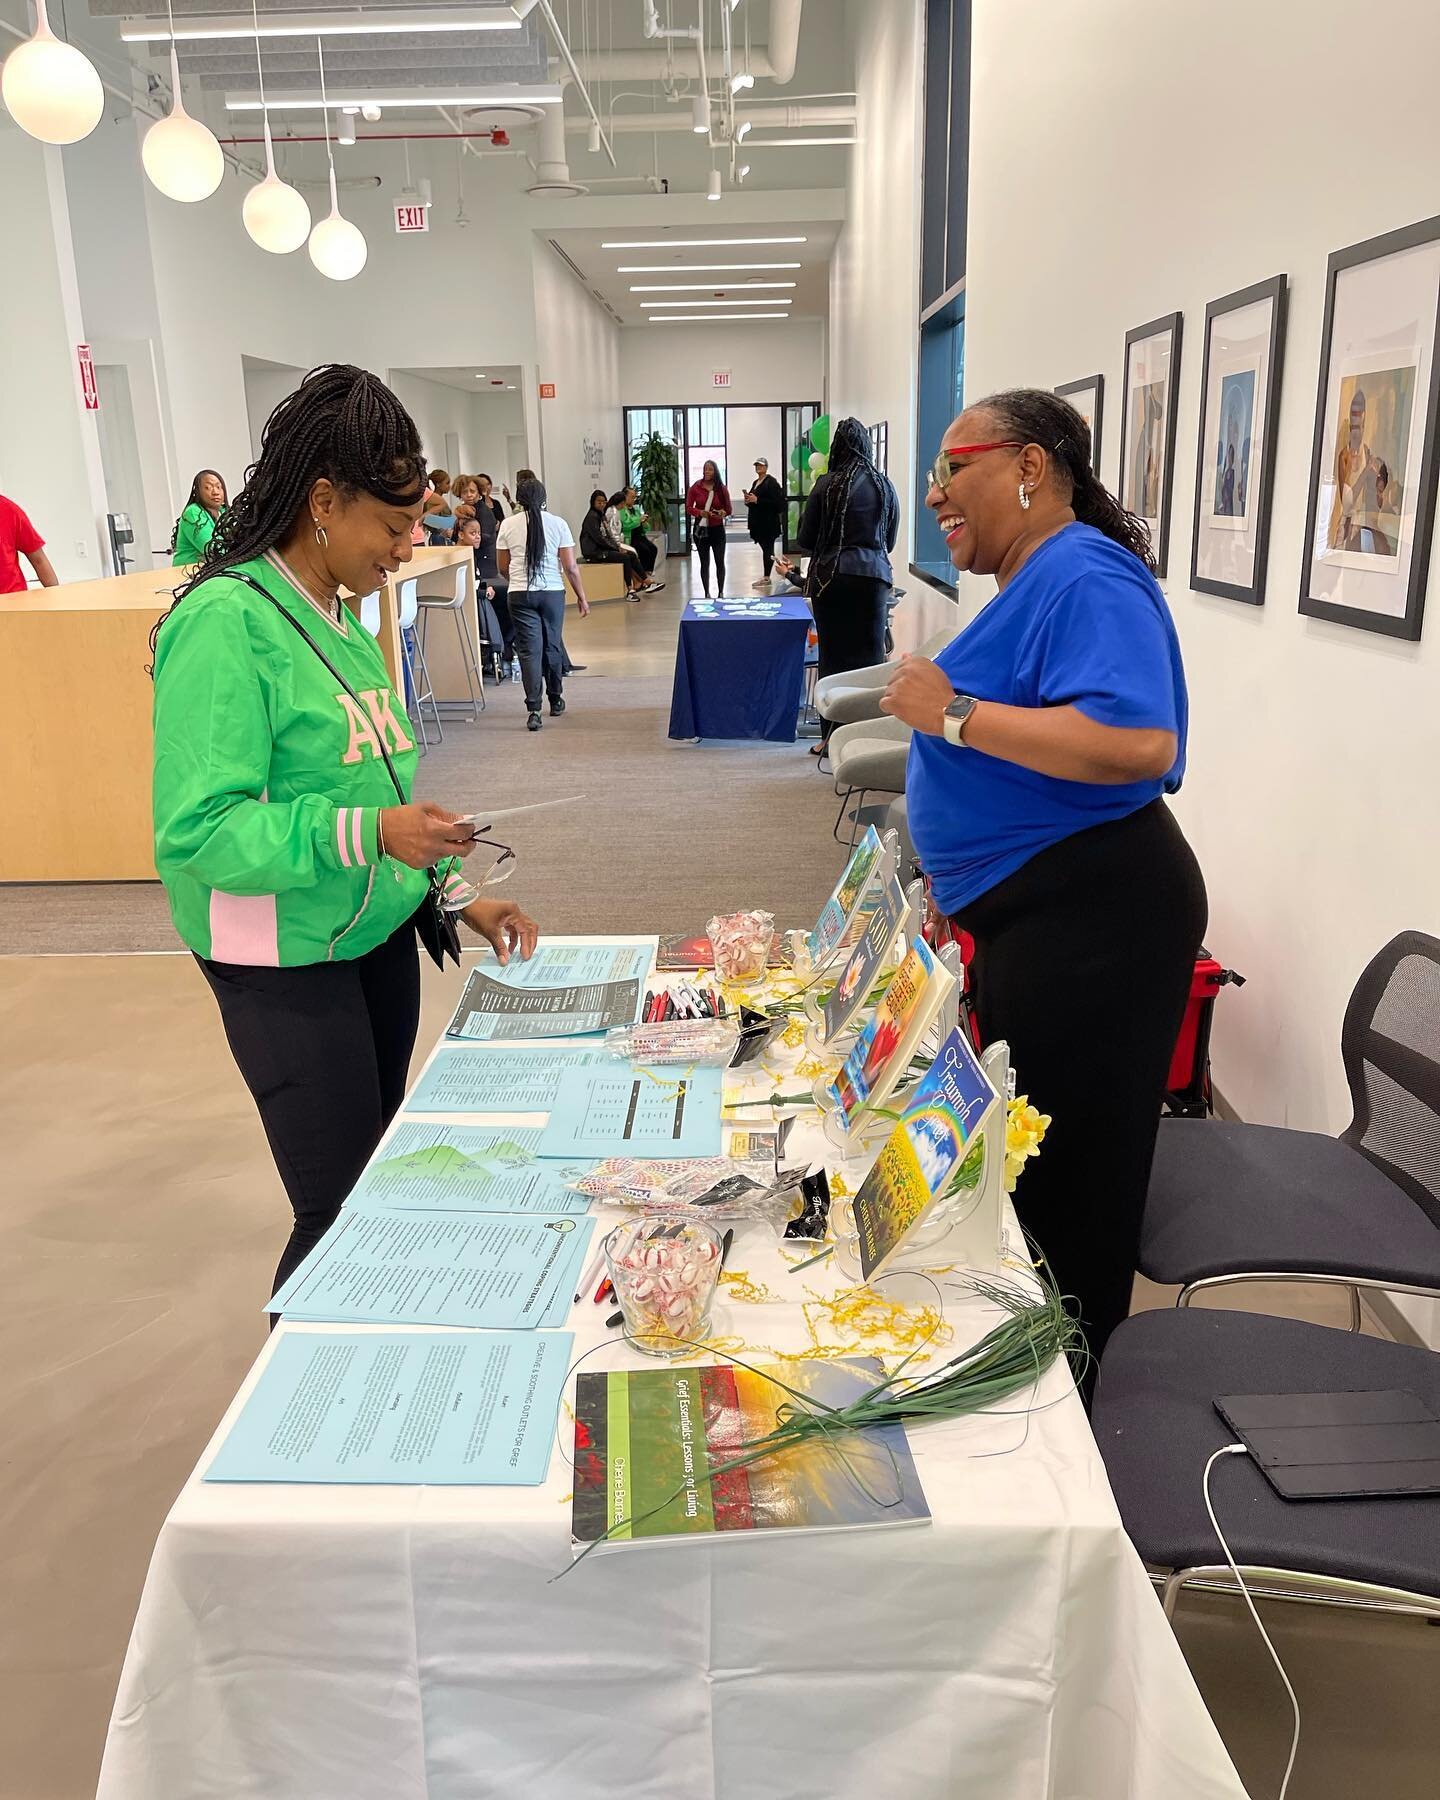 For Mental Health Awareness Month, we helped provide the community with information on how to identify their mental health and self care needs and how to address those needs by hosting a fair that featured companies that specialize in self care, ment